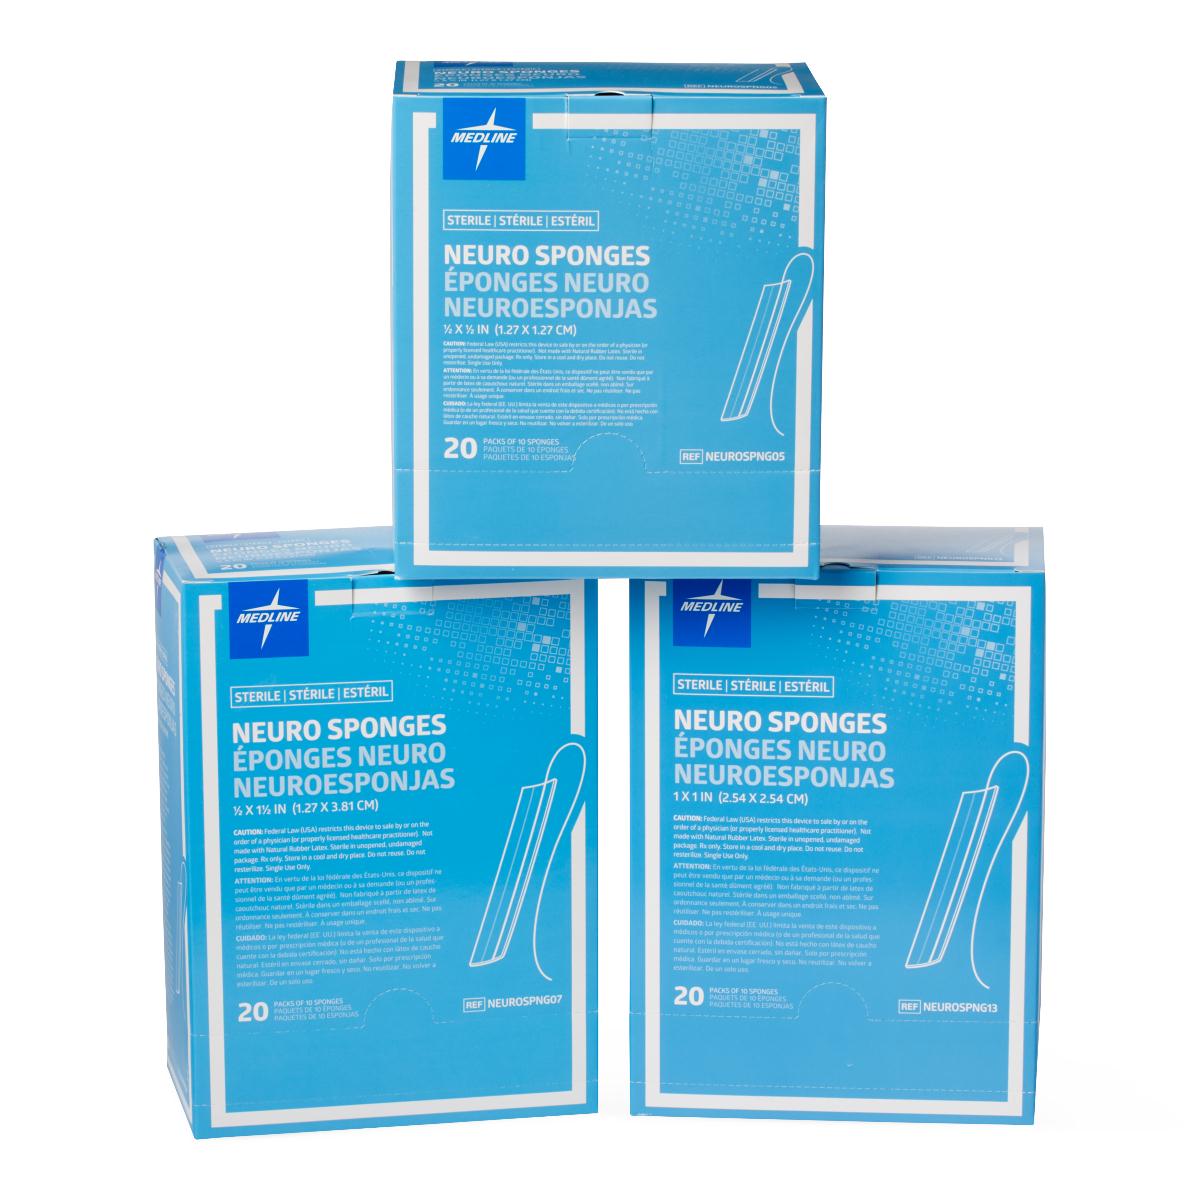 OR & Surgery Supplies - MEDLINE - Wasatch Medical Supply